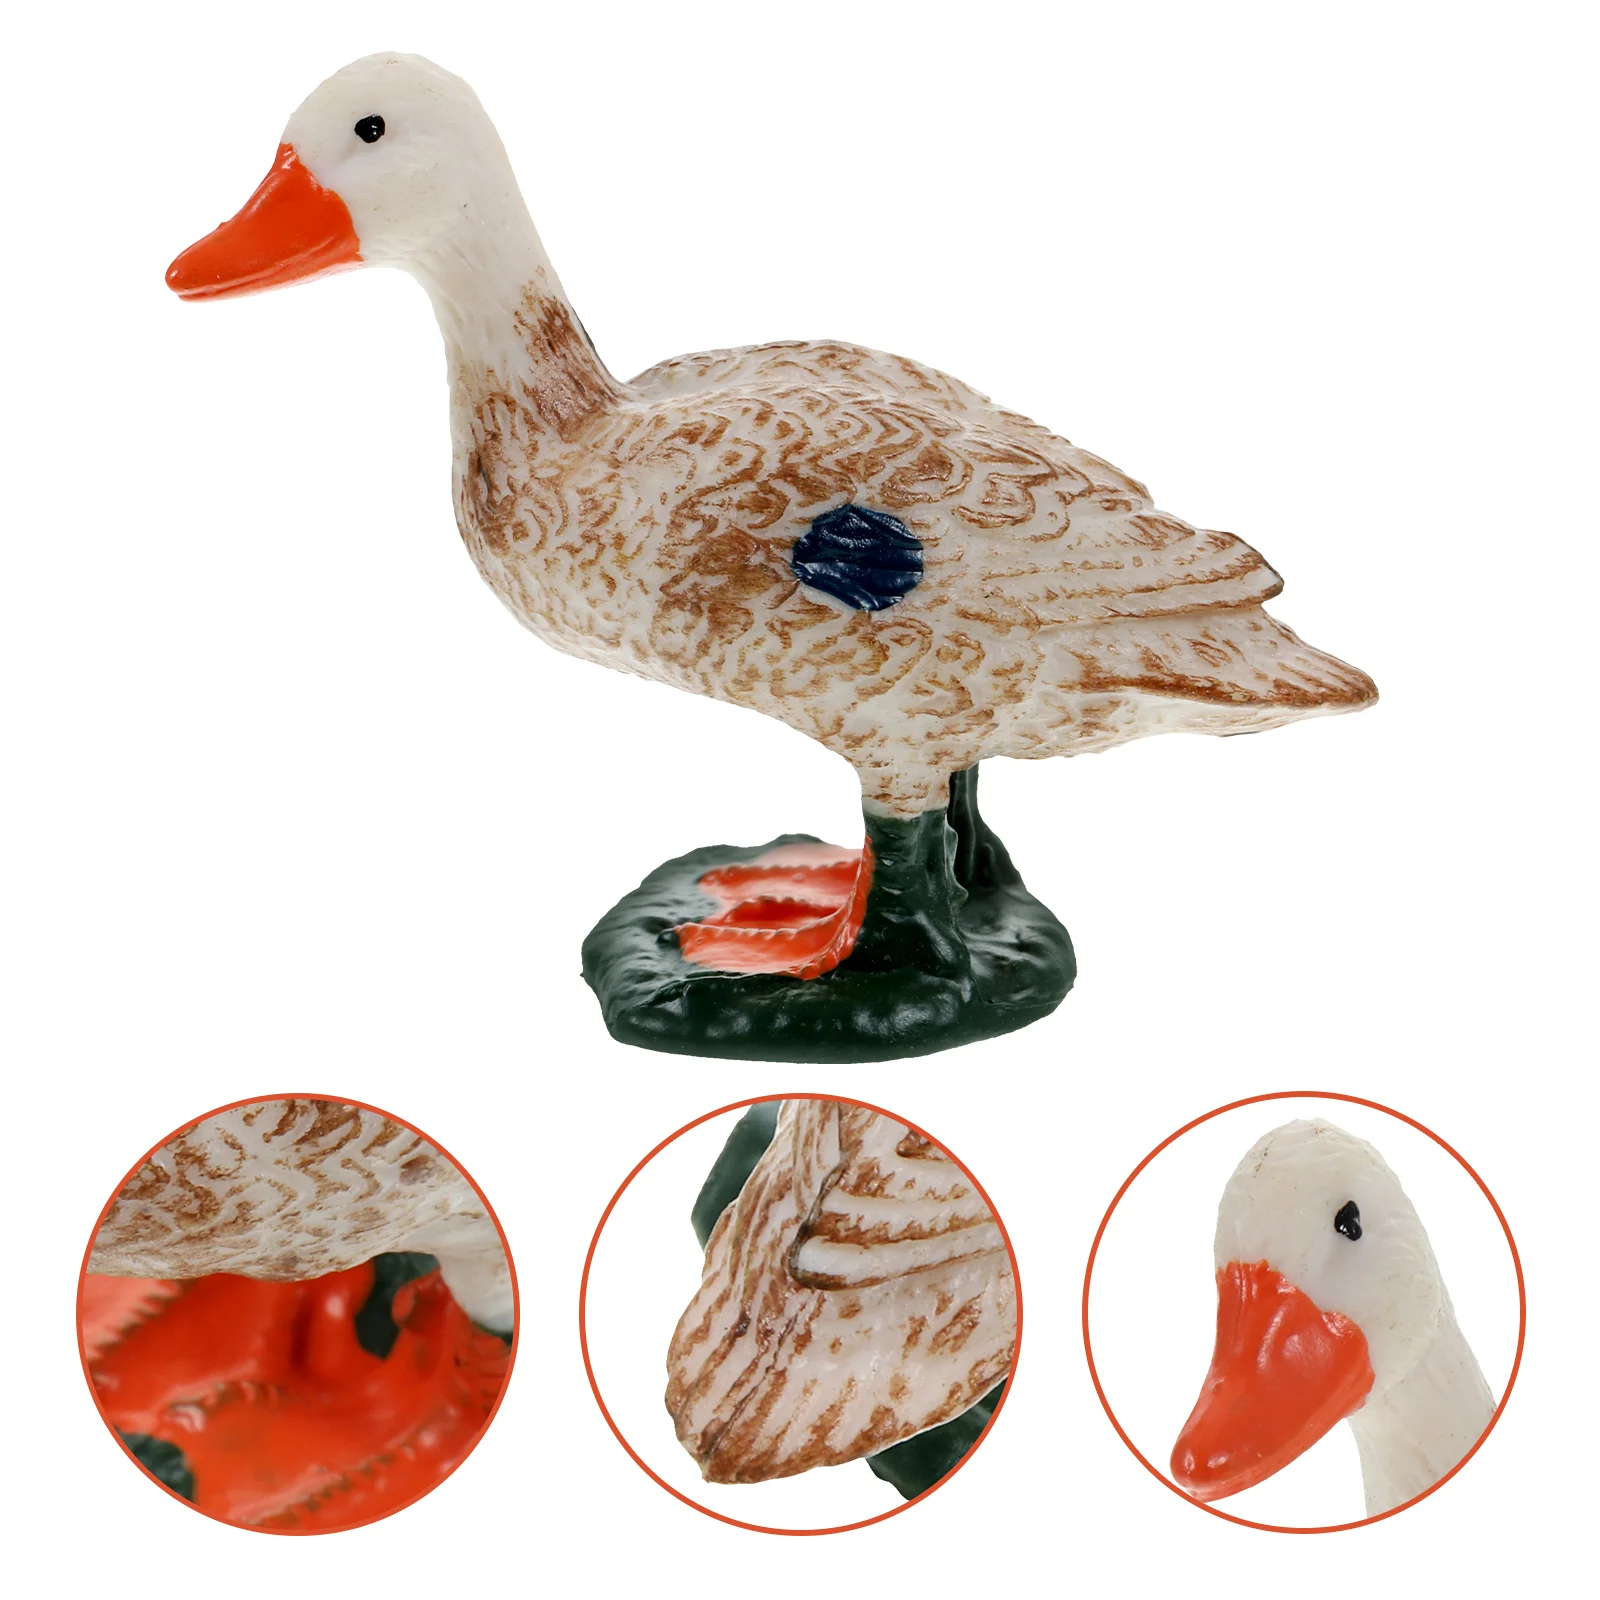 

Fairy Figurines Simulation Duckling Model Pond Lawn Ornament Landscaping Adornment Garden Statue Figurines